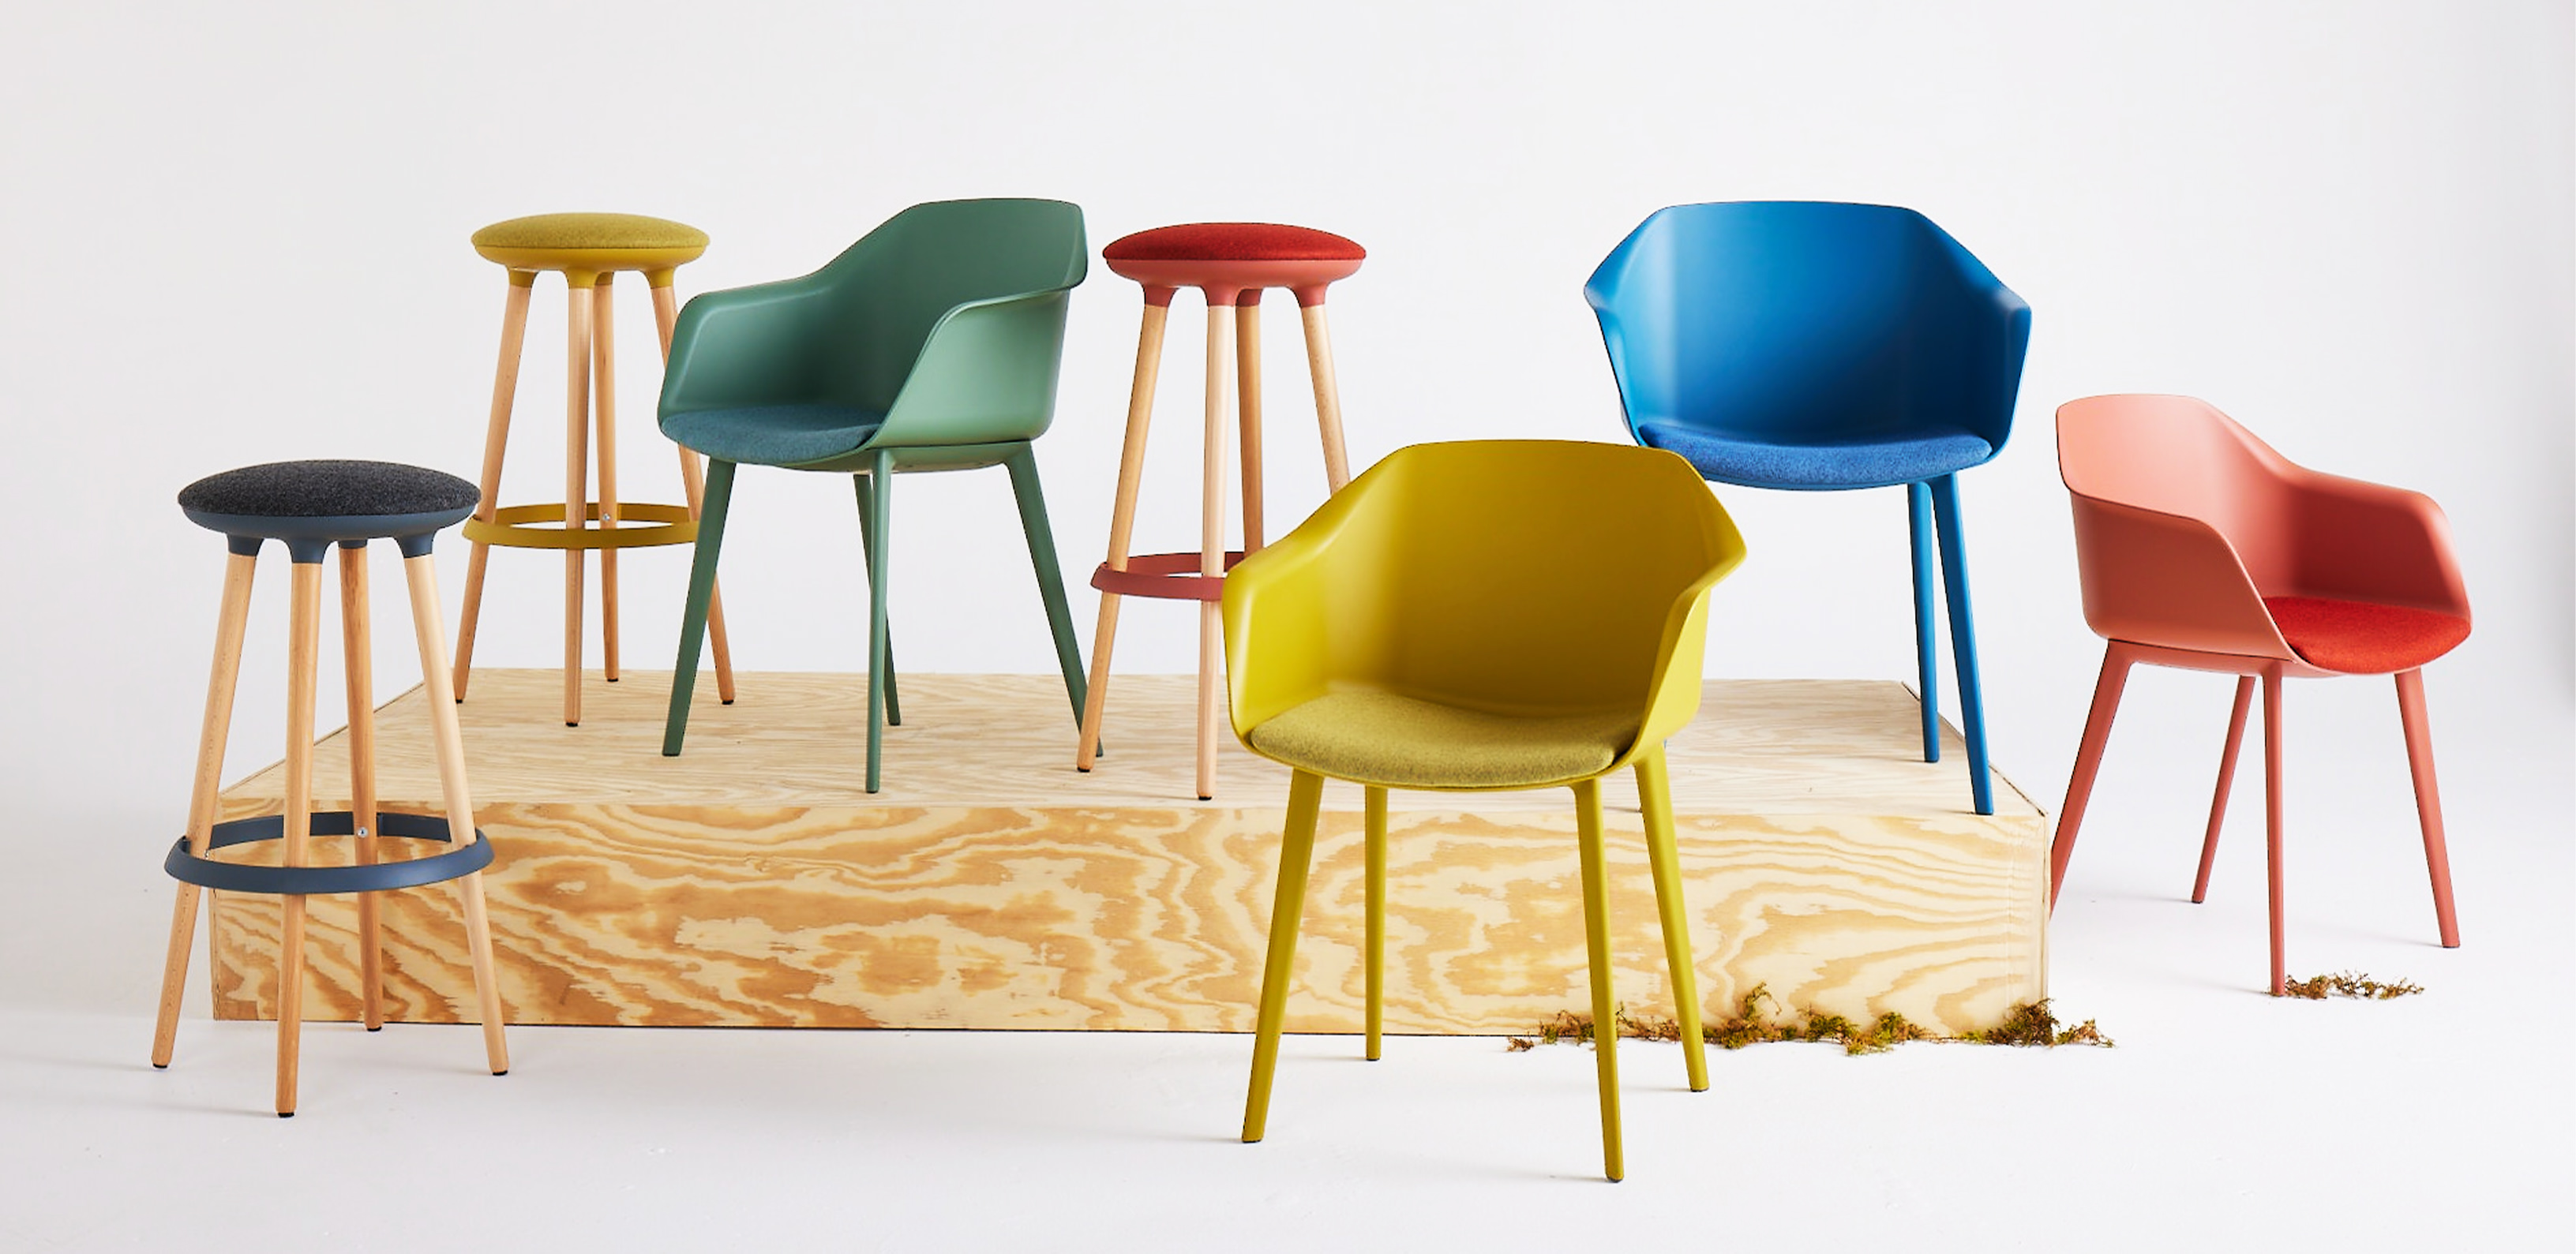 Coleurí chairs & Joí stools in all available colors.